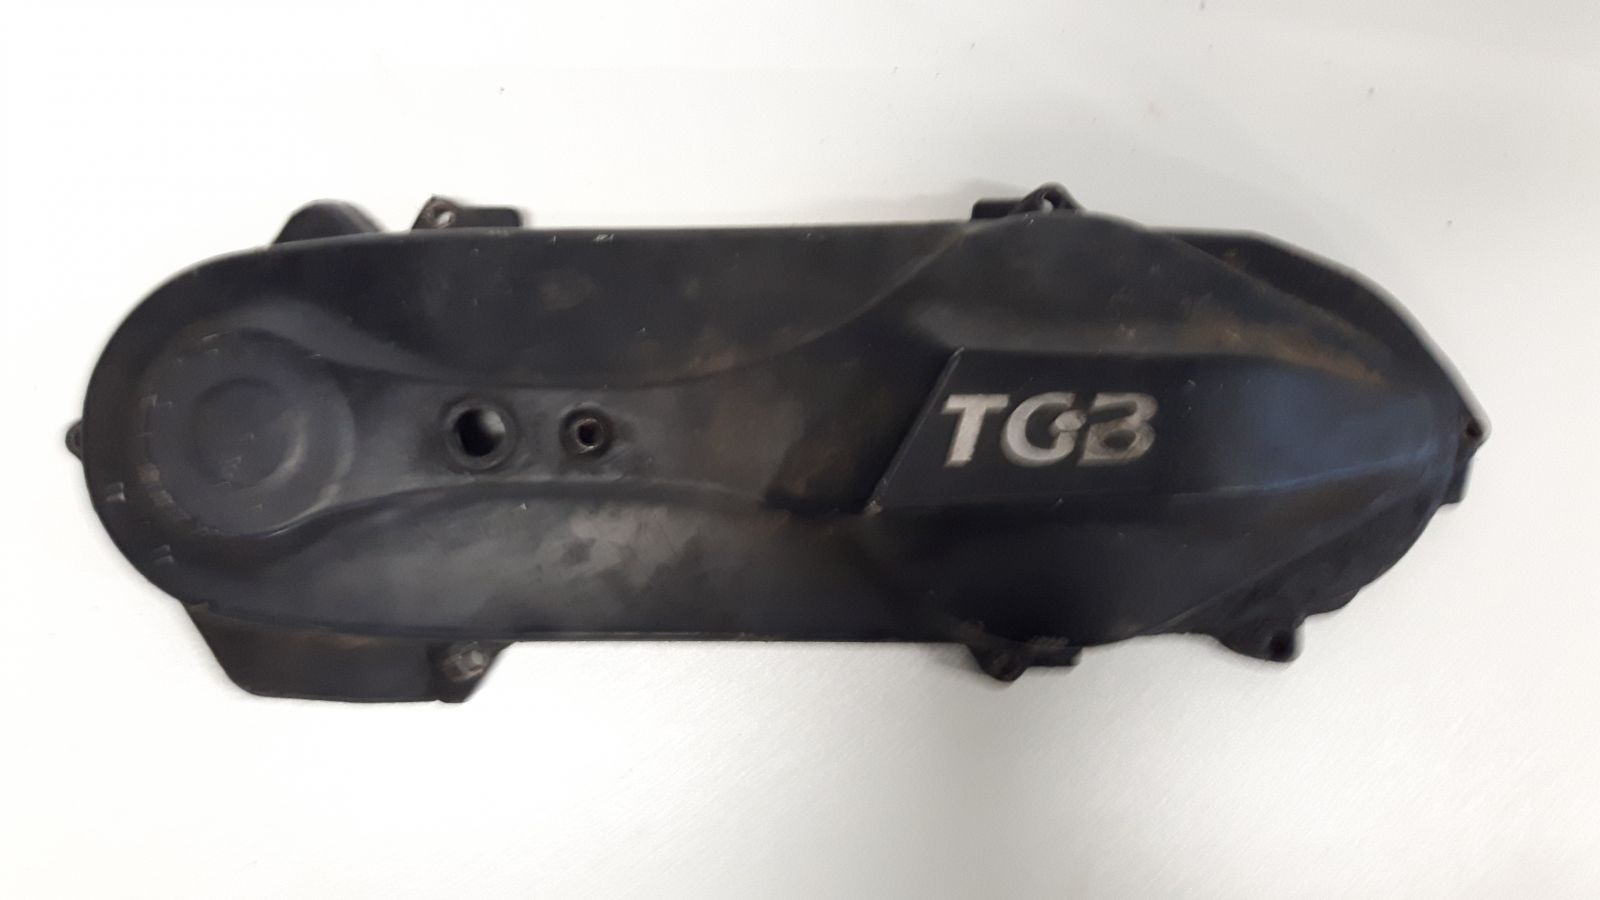 TGB 303 carter cover / engine cover